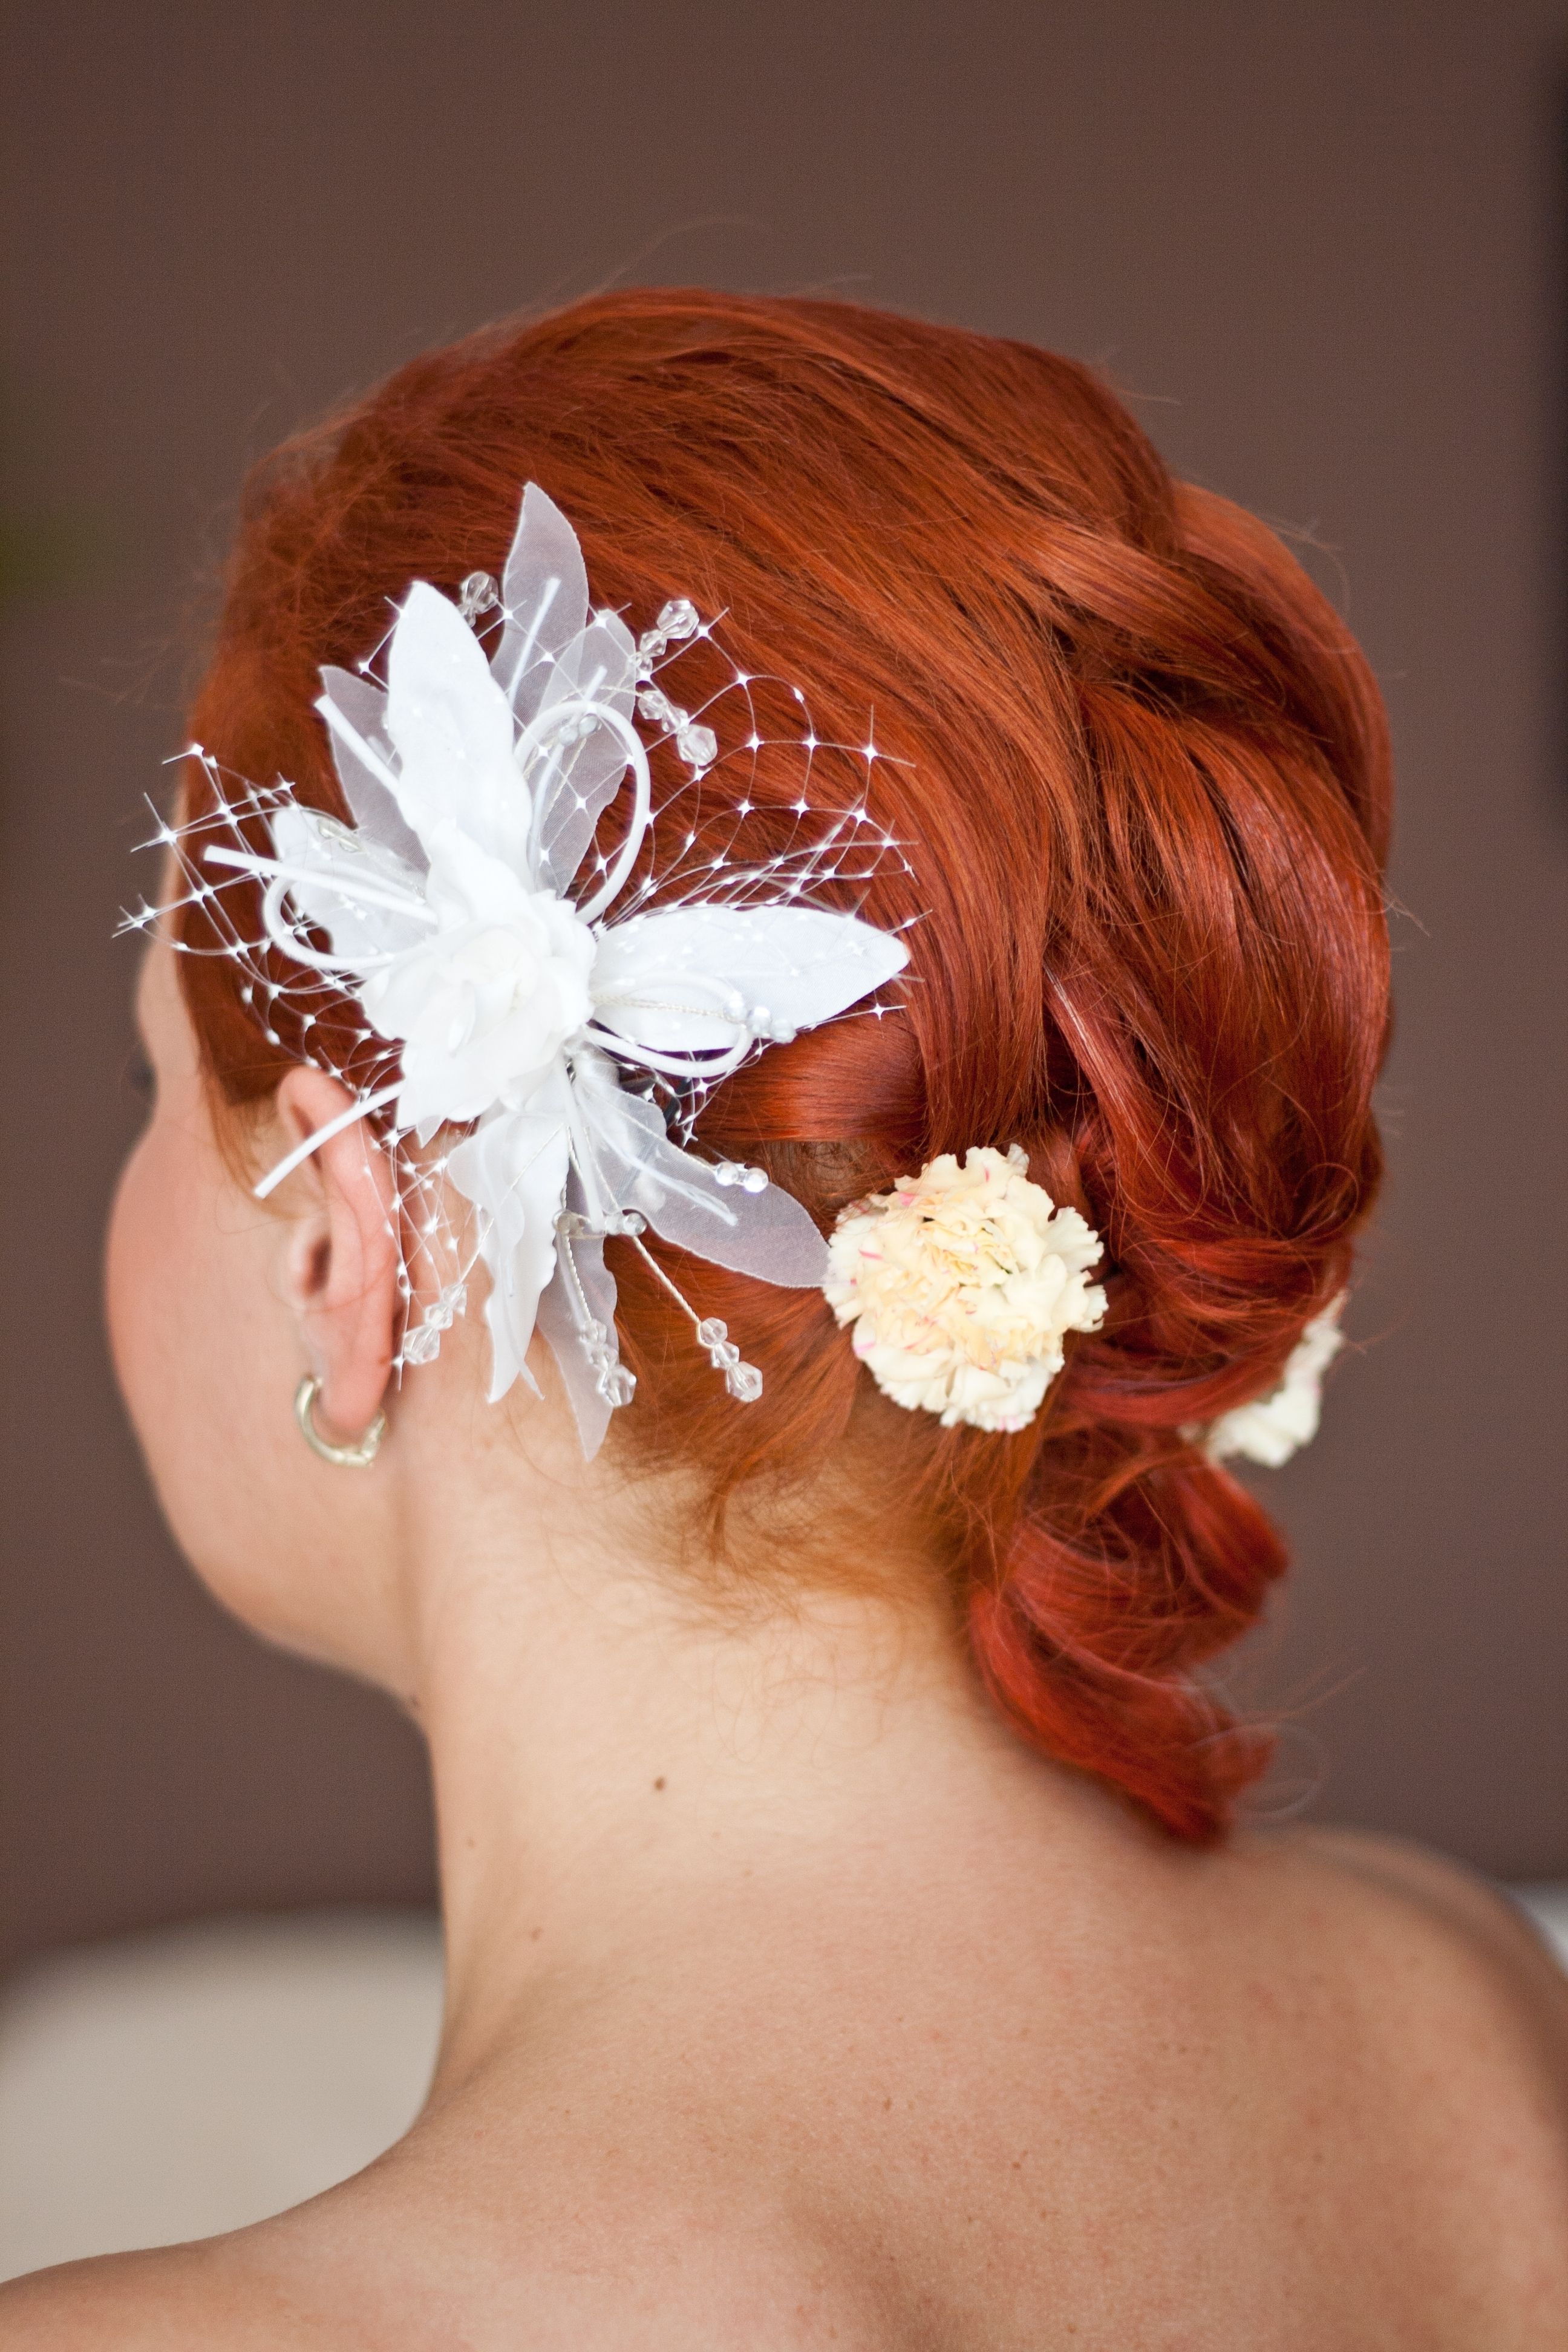 Most Current Wedding Hairstyles For Red Hair Within Free Images : Woman, Flower, Petal, Clothing, Wedding, Bride (View 14 of 15)